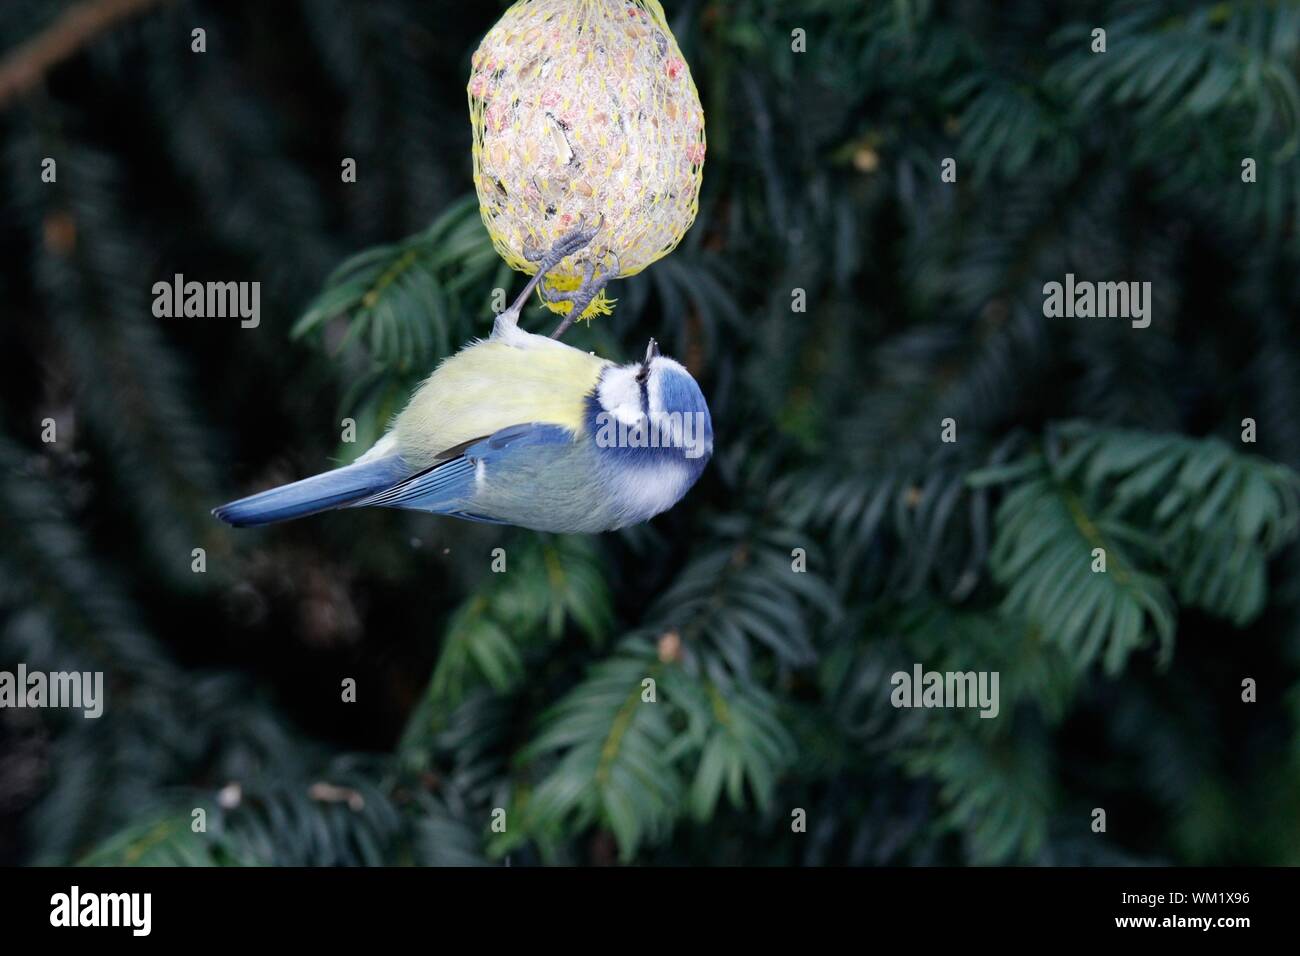 Close-up Of Bird On Feeder Hanging From Tree Stock Photo